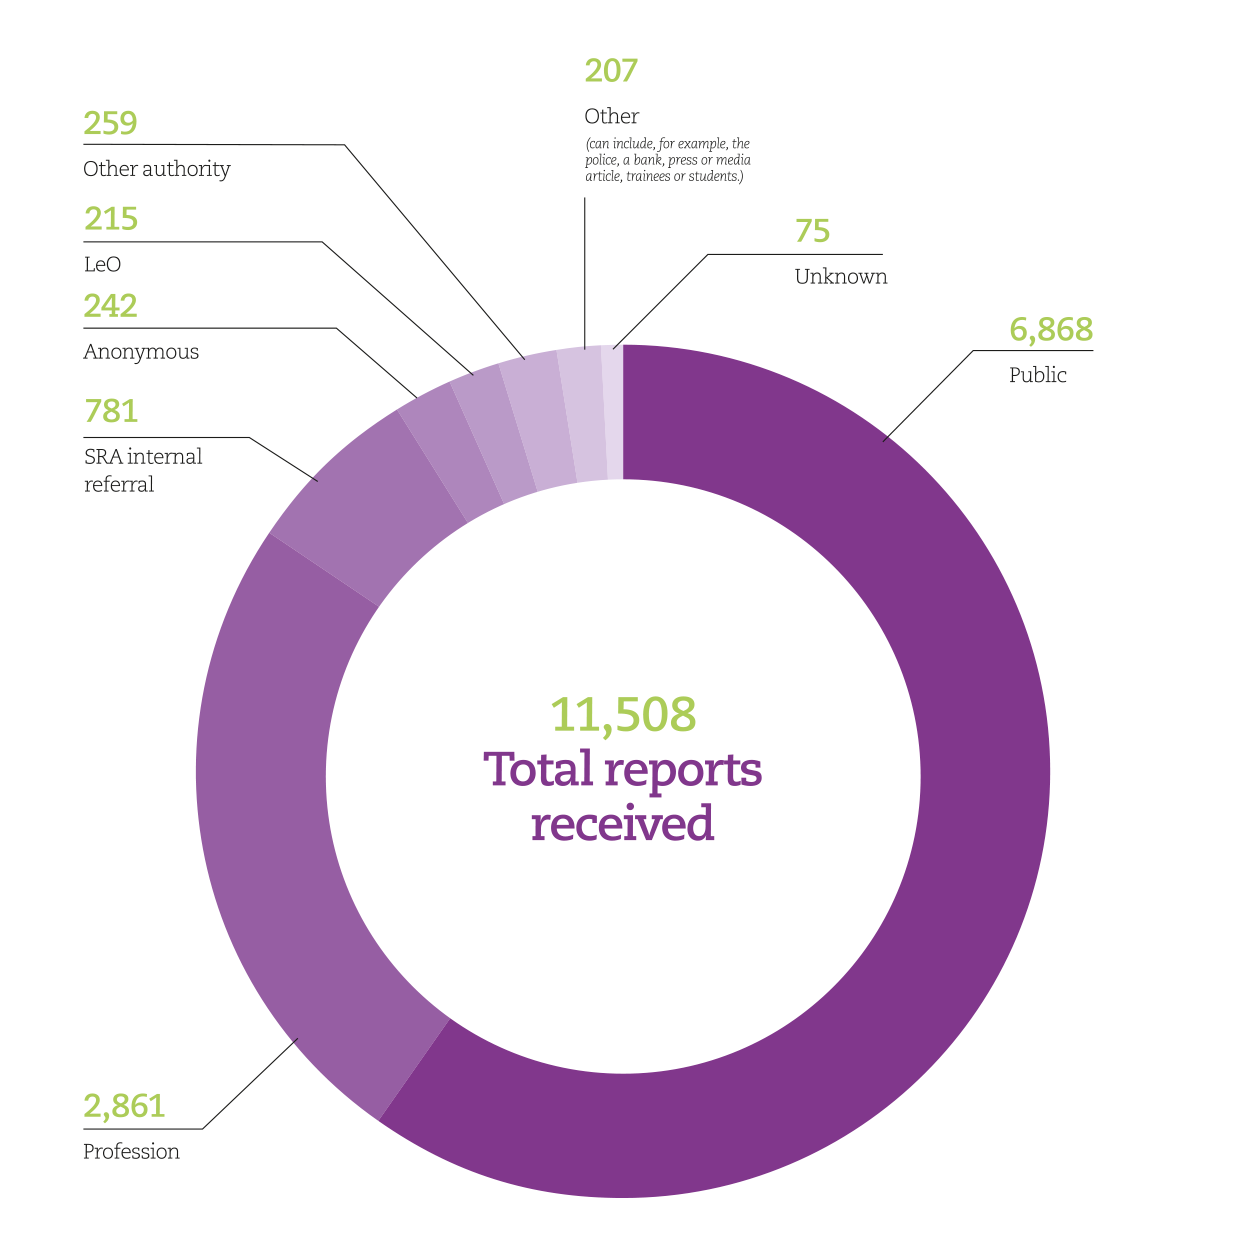 There are 146,625 practising solicitors. There were 11,508 concerns reported to us in this time period. Of the concerns, we investigated, 165 were not in our jurisdiction to investigate; 911 were redirected internally or sent to the Legal Ombudsman; investigation was not necessary in 4,405 cases; 2,145 investigations remain ongoing and an investigation was carried out in 4,711 cases. There is no linear relationship between the number of reports we receive and the number of outcomes in a 12-month period. This is because not all cases will be resolved within that timeframe.
In 4,291 investigations, we did not find that the firm or solicitor breached, or seriously breached, our rules. We engage with some firms to put things right and to make sure they are compliant. There were 271 cases which resulted in us issuing a sanction. These sanctions were: letters of advice in 132 cases; a rebuke in 68; fines in 46; section 43 orders in 44; conditions placed on practising certificates in 21; findings and warnings in 10; voluntary removal from the roll in 9; and, section 47 (2) (g) in 5. A section 43 order means we restrict non-lawyers, such as managers and other employees, from working in a law firm without our permission. A 47 (2) (g) order means a former solicitor who has been removed from the roll cannot be restored unless the S.D.T. allows it.
We referred 134 cases to the S.D.T. There were 81 cases which resulted in a fine; 78 which resulted in a strike off; 26 which resulted in a suspension; 13 which resulted in another decision; and 7 which resulted in no order. There is no linear relationship between the number of reports we receive and the number of outcomes in a 12-month period. Please note, one case can result in multiple outcomes.
